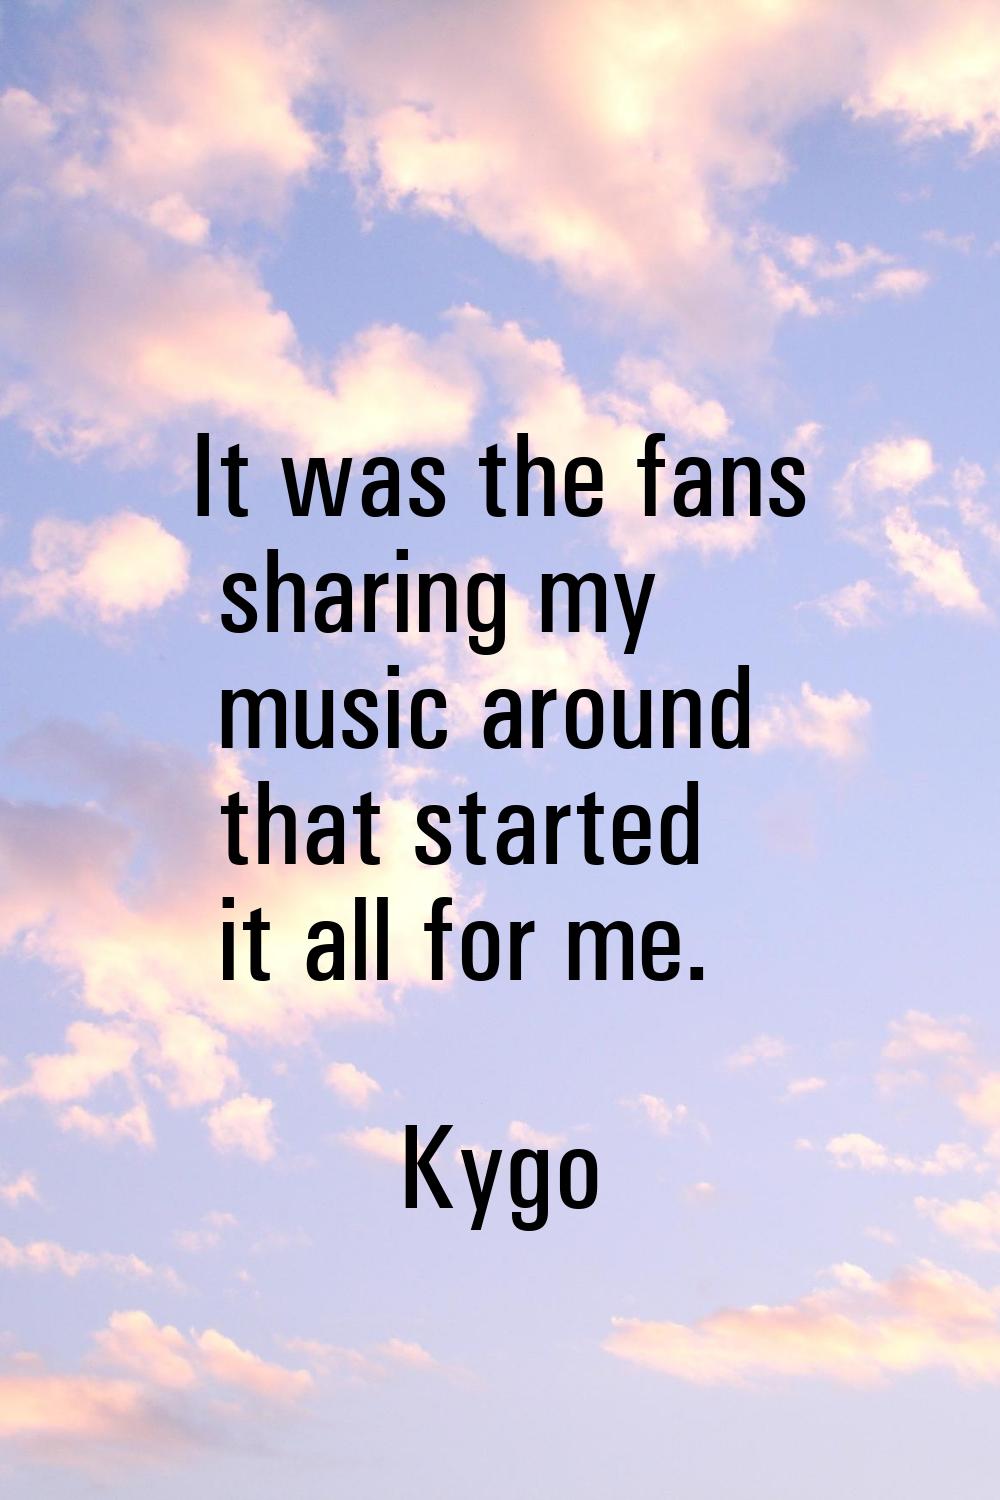 It was the fans sharing my music around that started it all for me.